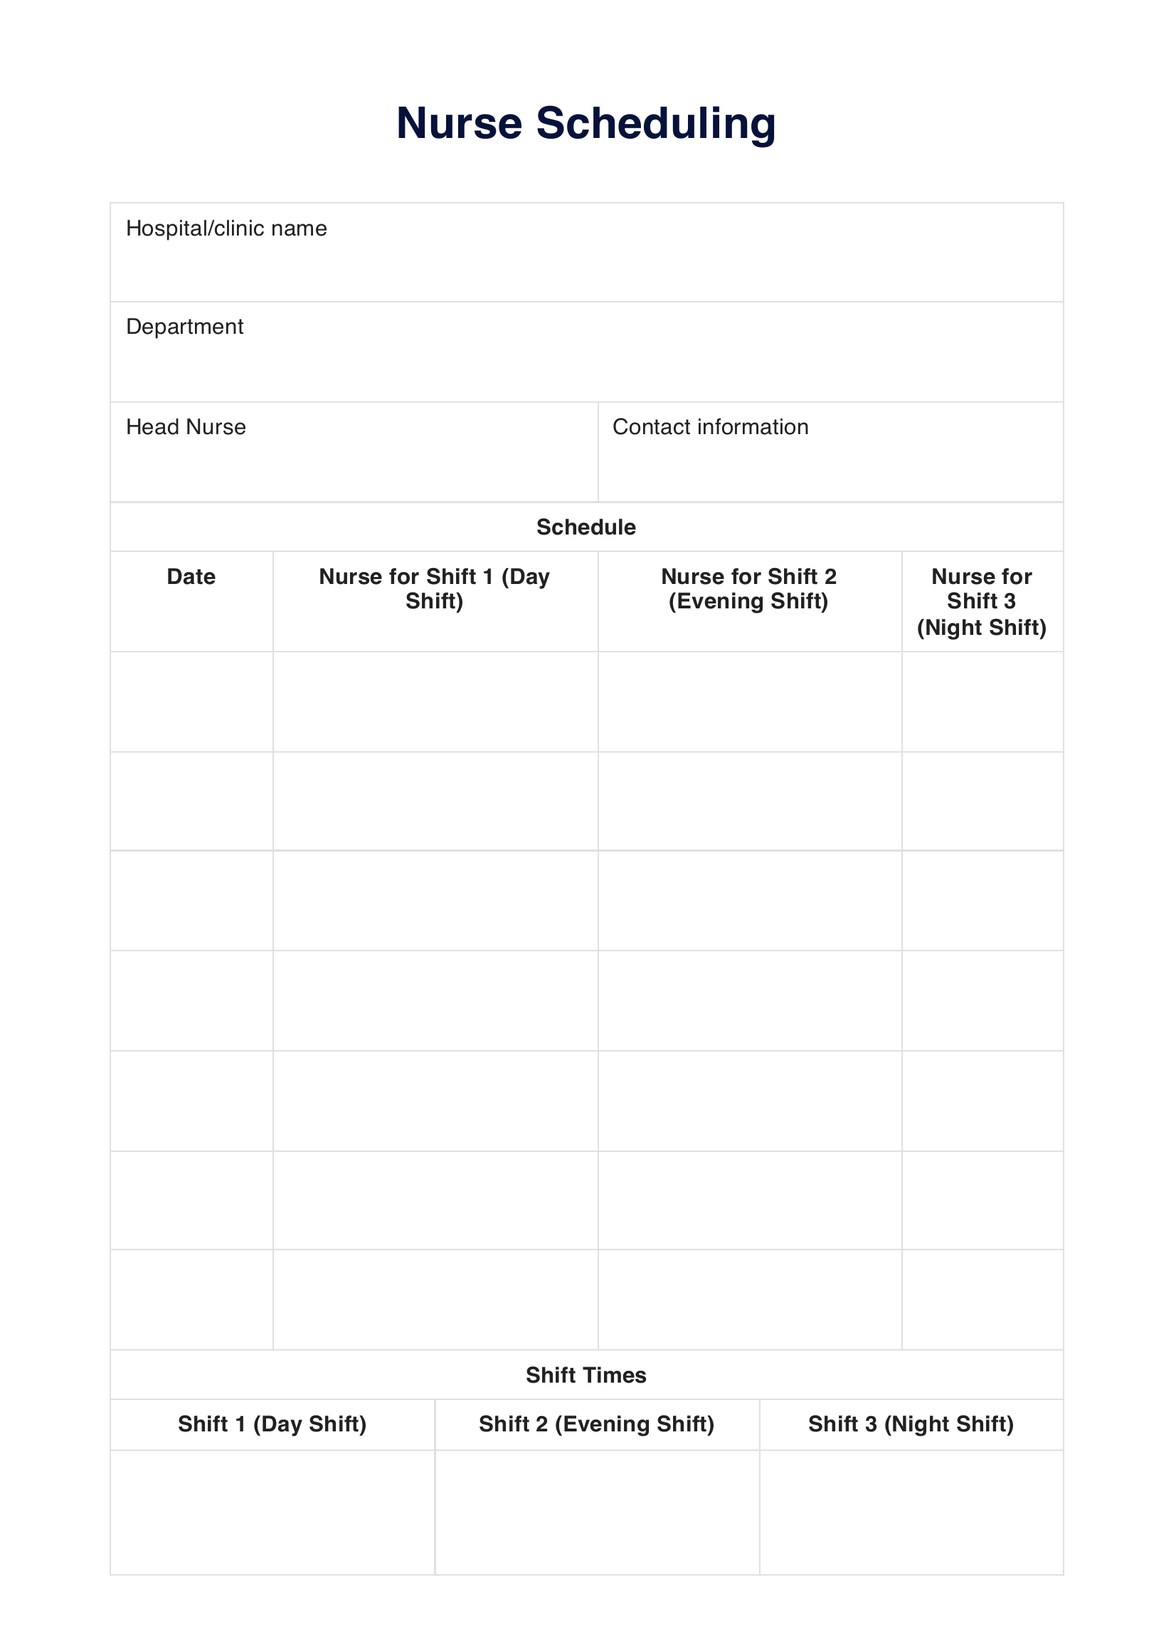 Nurse Scheduling Template PDF Example